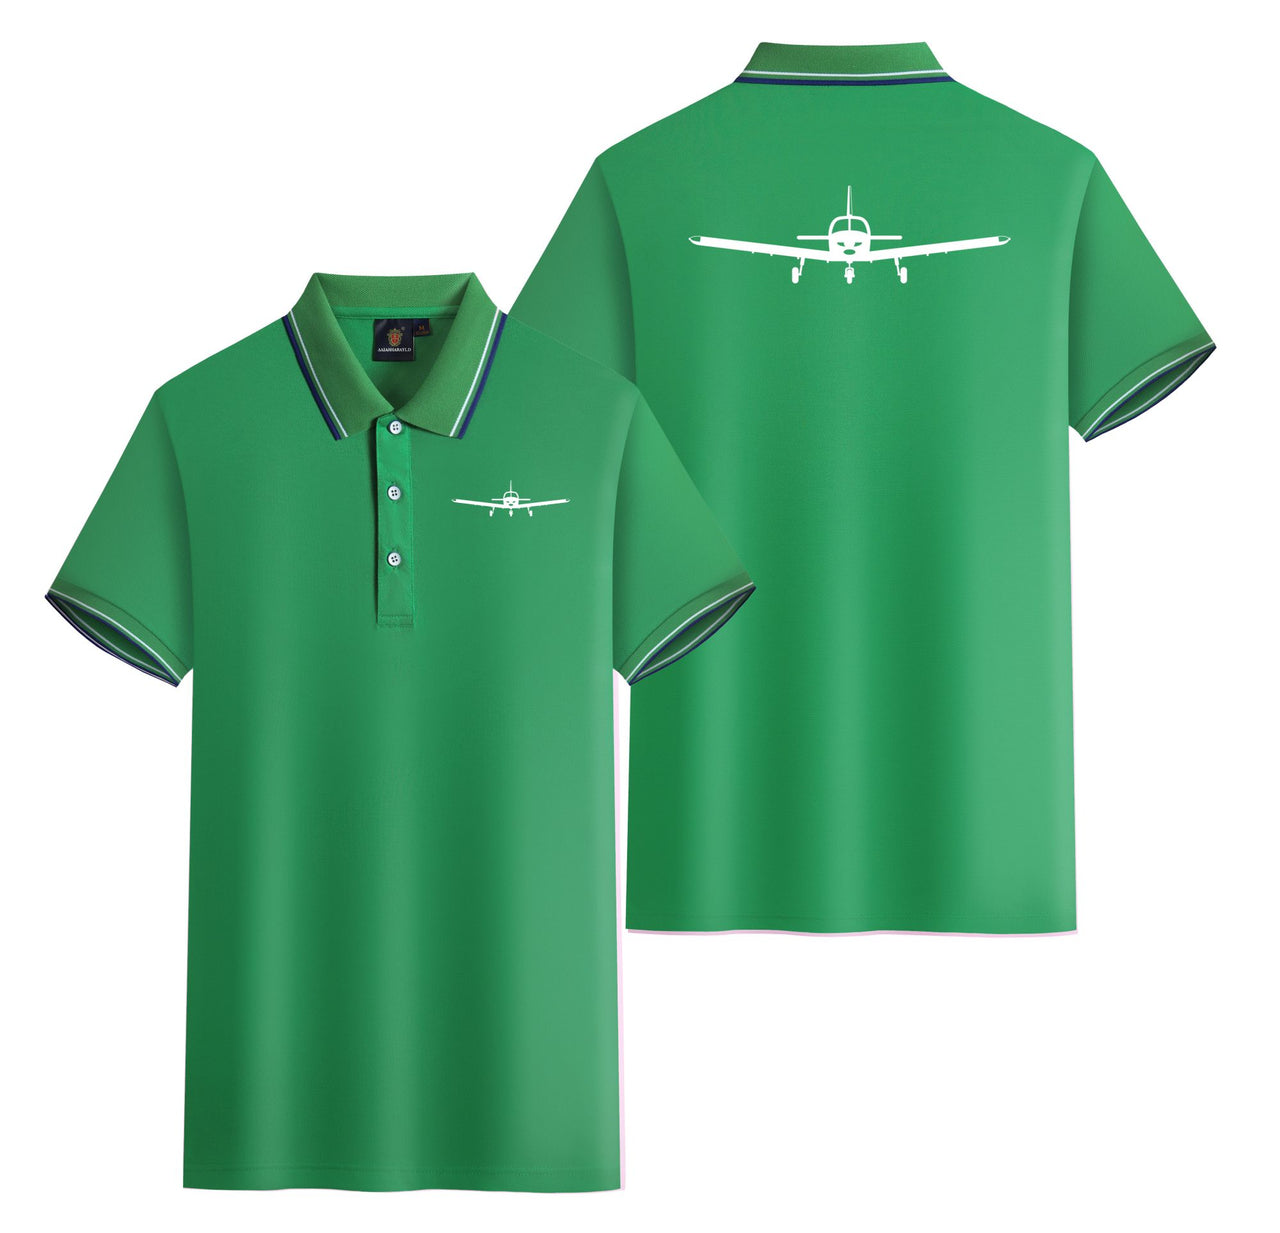 Piper PA28 Silhouette Plane Designed Stylish Polo T-Shirts (Double-Side)